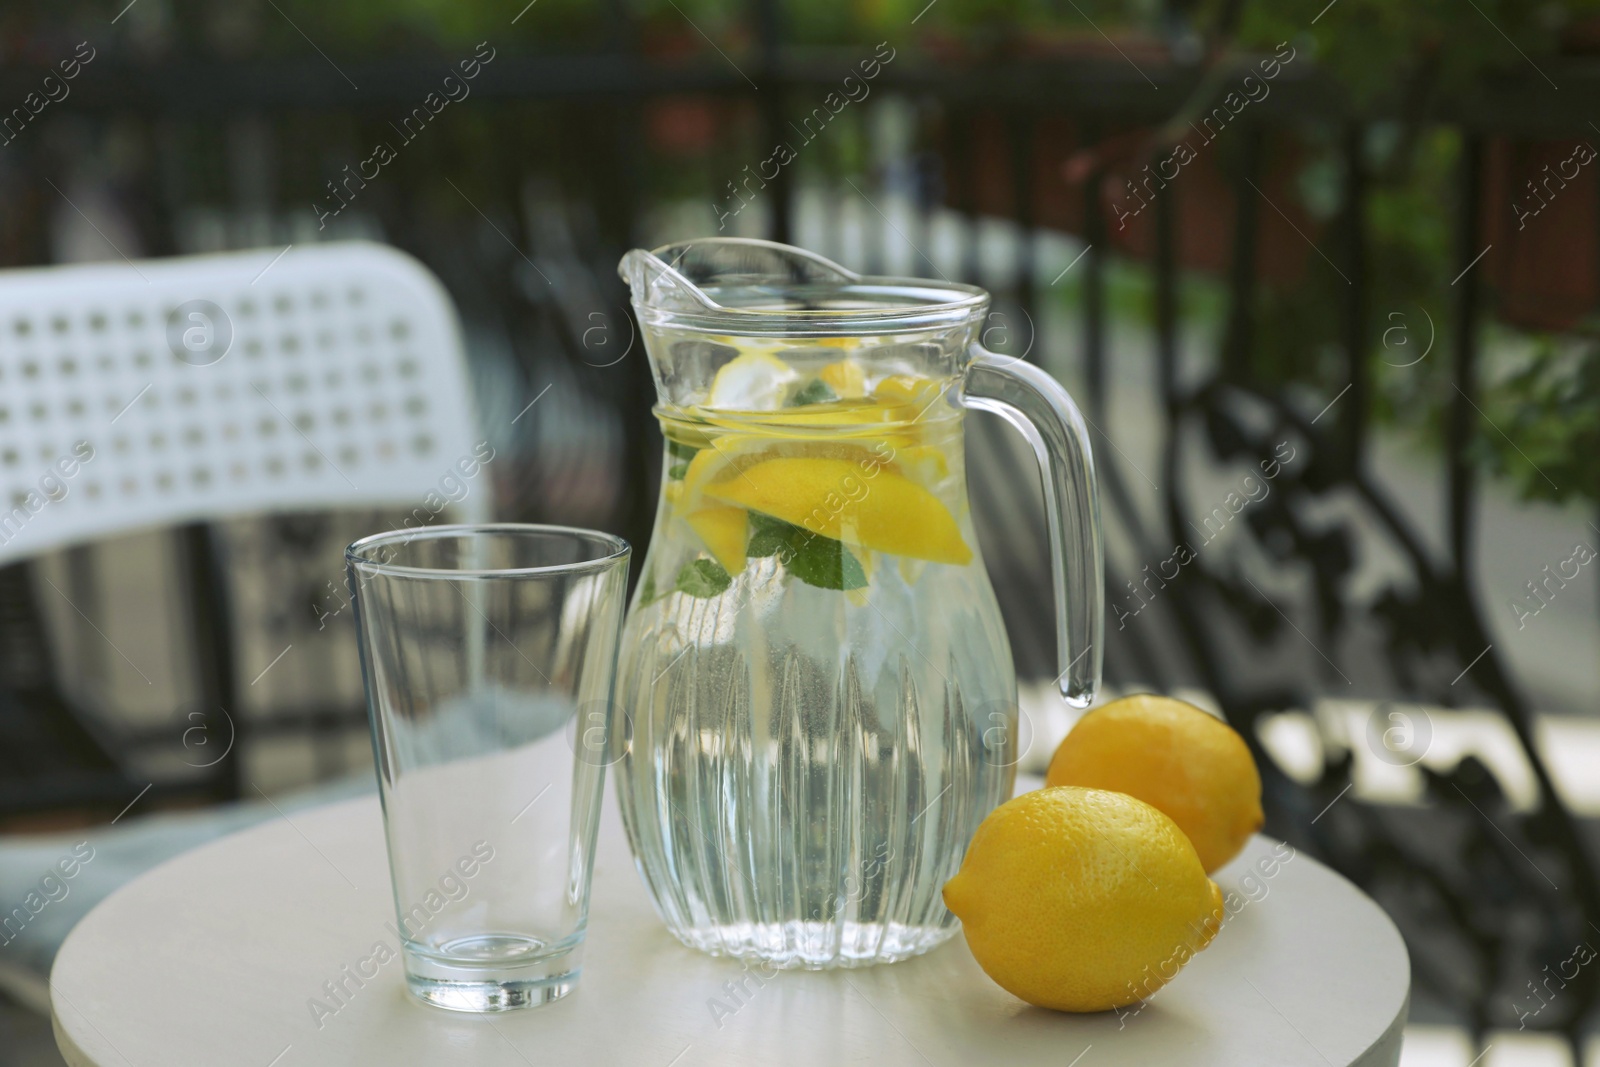 Photo of Jug with refreshing lemon water, glass and citrus fruits on light table outdoors